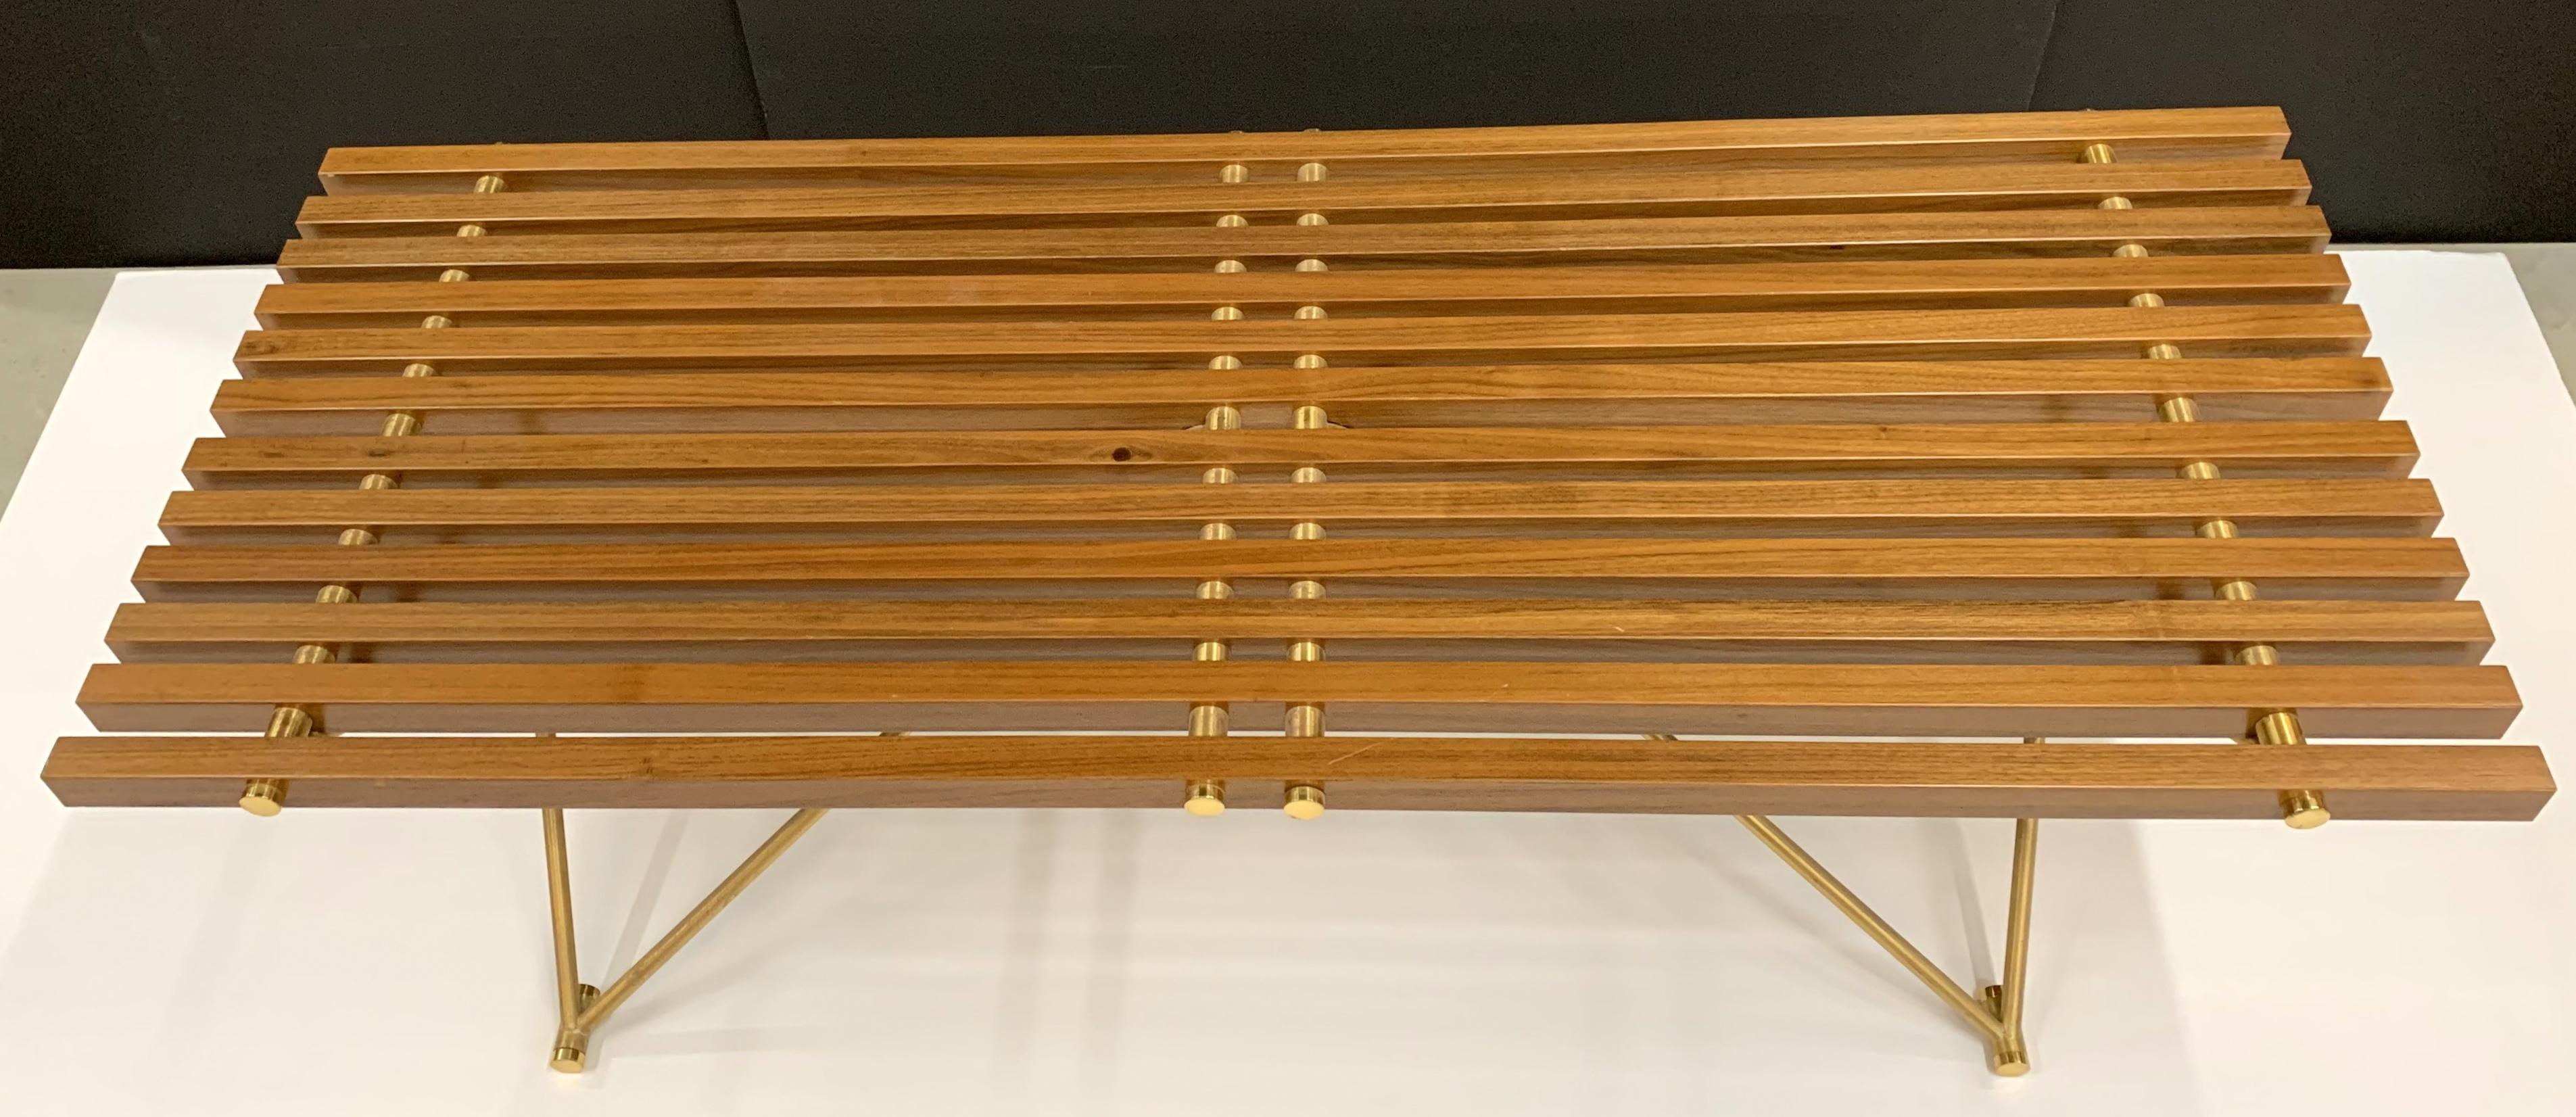 A wonderful Mid-Century Modern wood slat and polished brass coffee or cocktail table
Purchased from Lorin Marsh NYC.